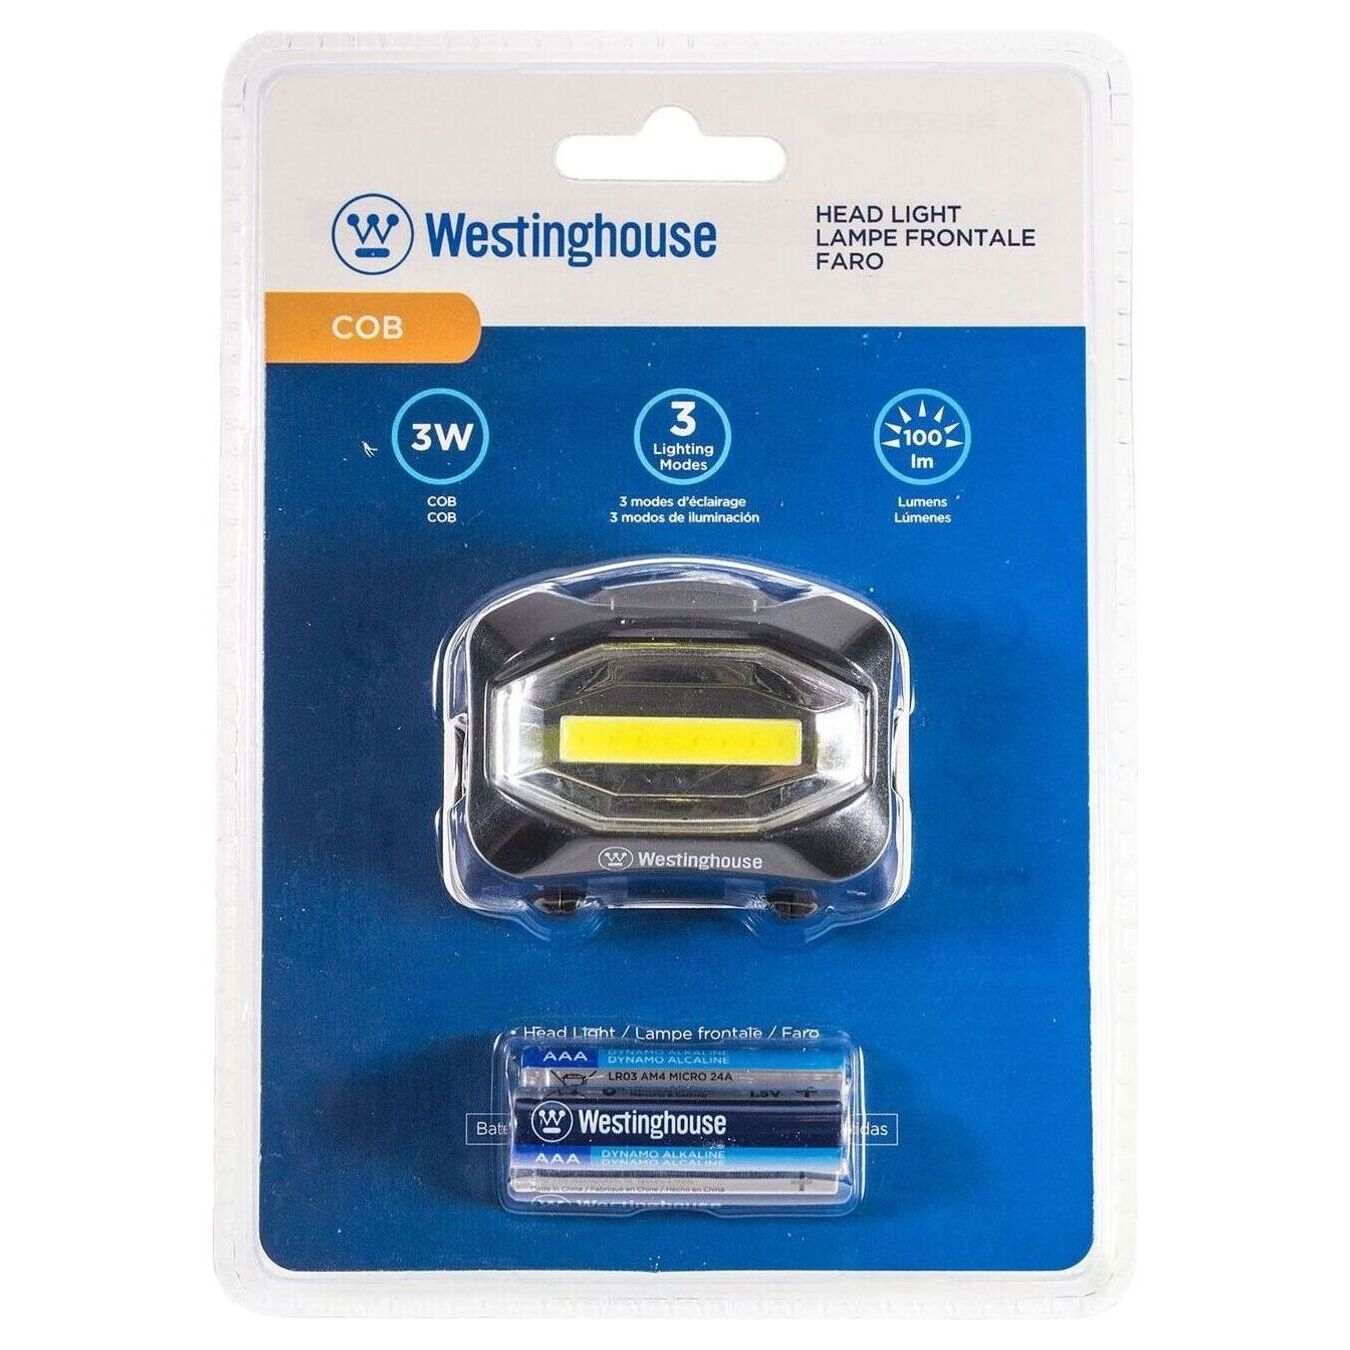 Headlamp Westinghouse WF210 3W(30m) 100Lm+ 3x AAA/LR03 batteries included